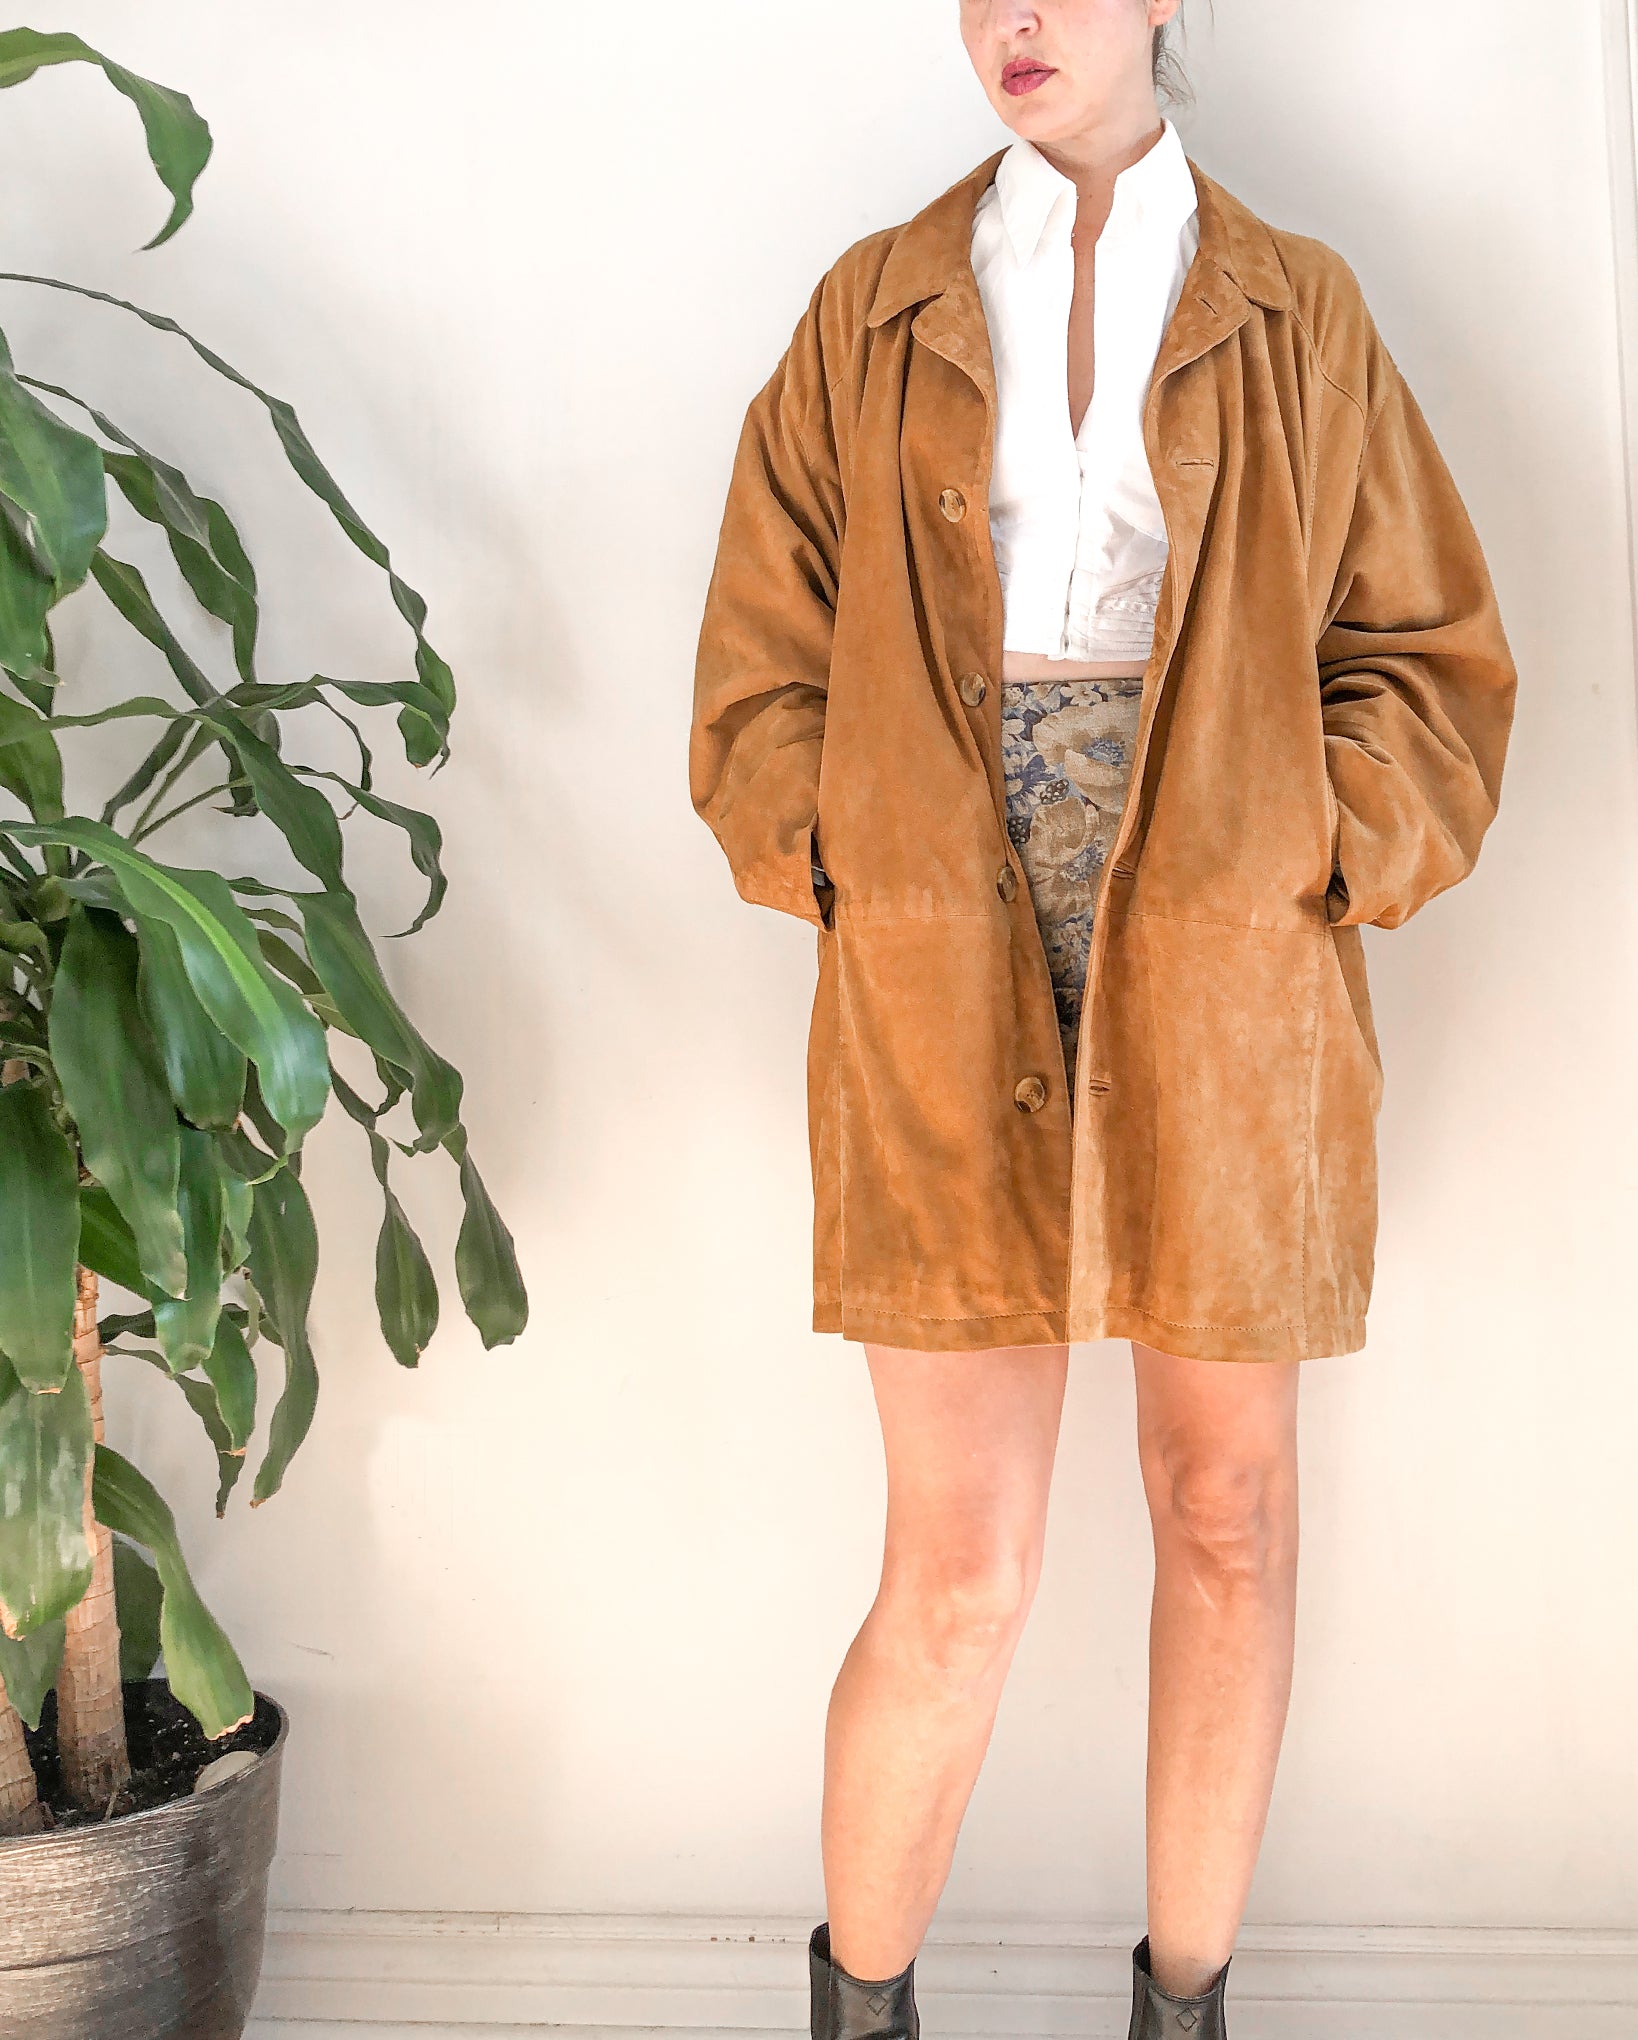 Guy Laroche Caramel Suede Coat, Unisex Fall Vintage Brown Leather Jacket, Made in Canada